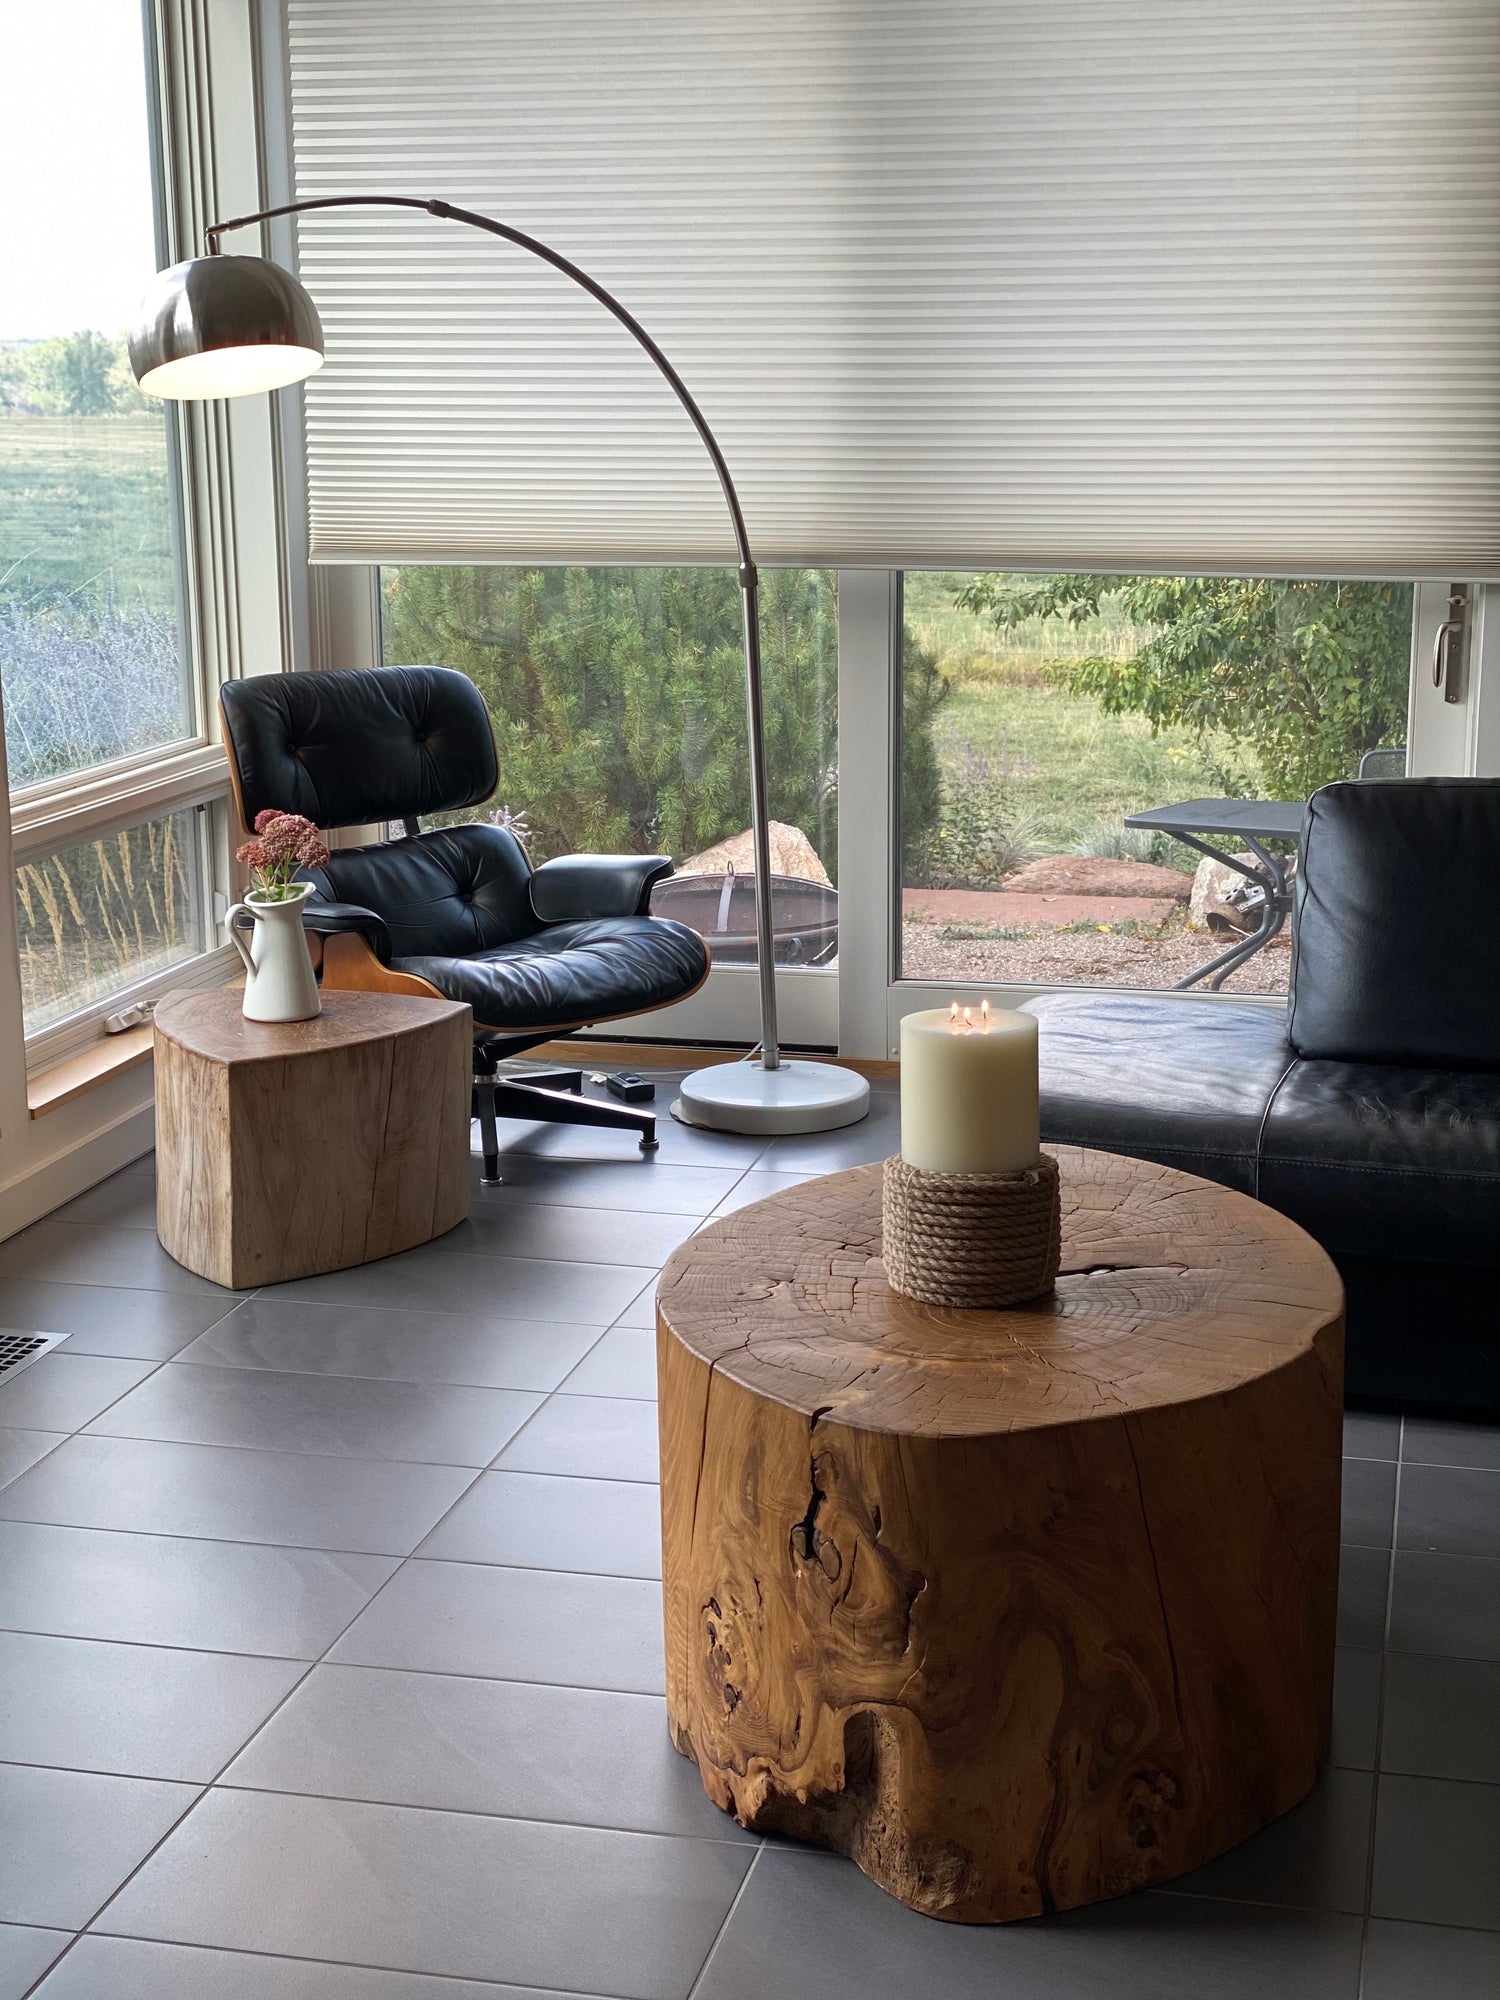 Custom, hand-crafted ecoart furniture made by Tree Sky in Boulder, Colorado. A round wood table with a candlo on top, in an office with black leather chairs.